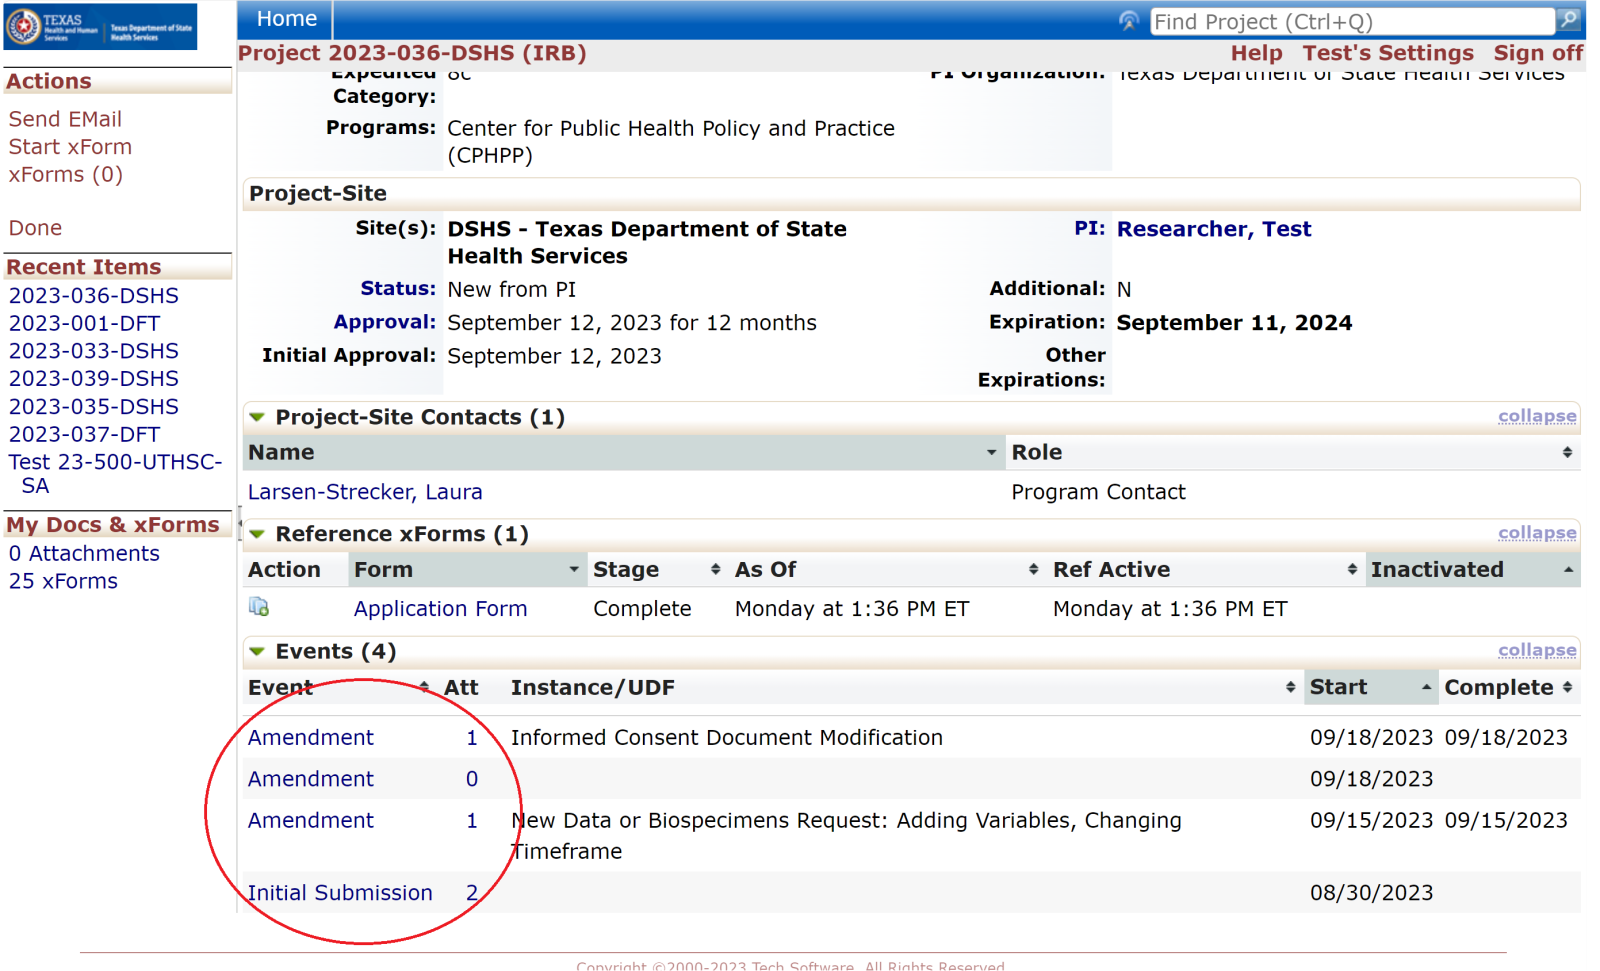 "Screenshot of Events Recorded in the IRB Online System"